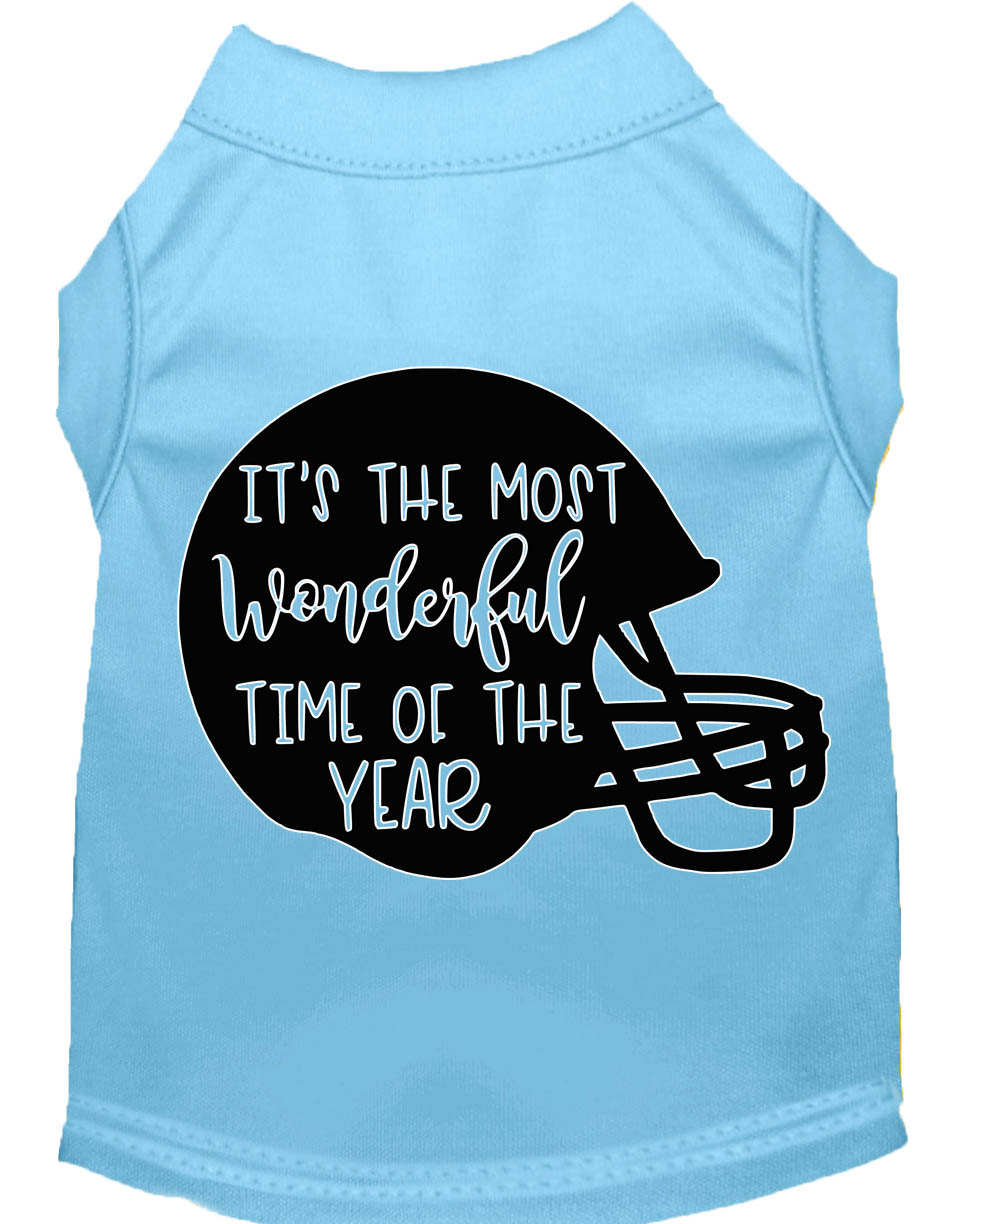 Most Wonderful Time of the Year (Football) Screen Print Dog Shirt Baby Blue XS